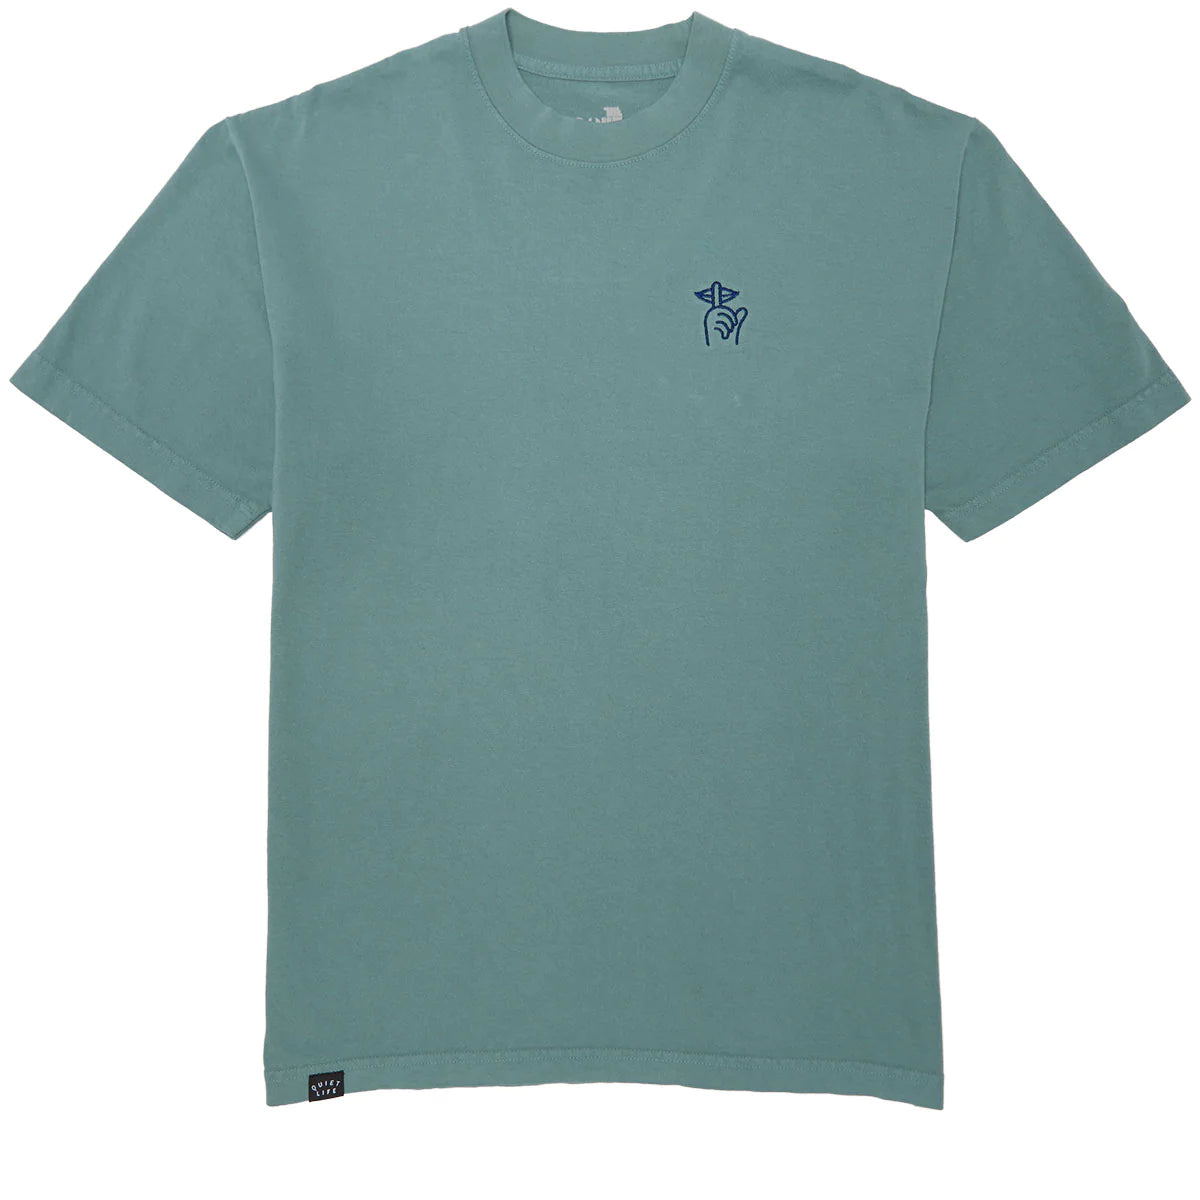 Quiet Life Shhh Embroidered T-Shirt - Mist Green